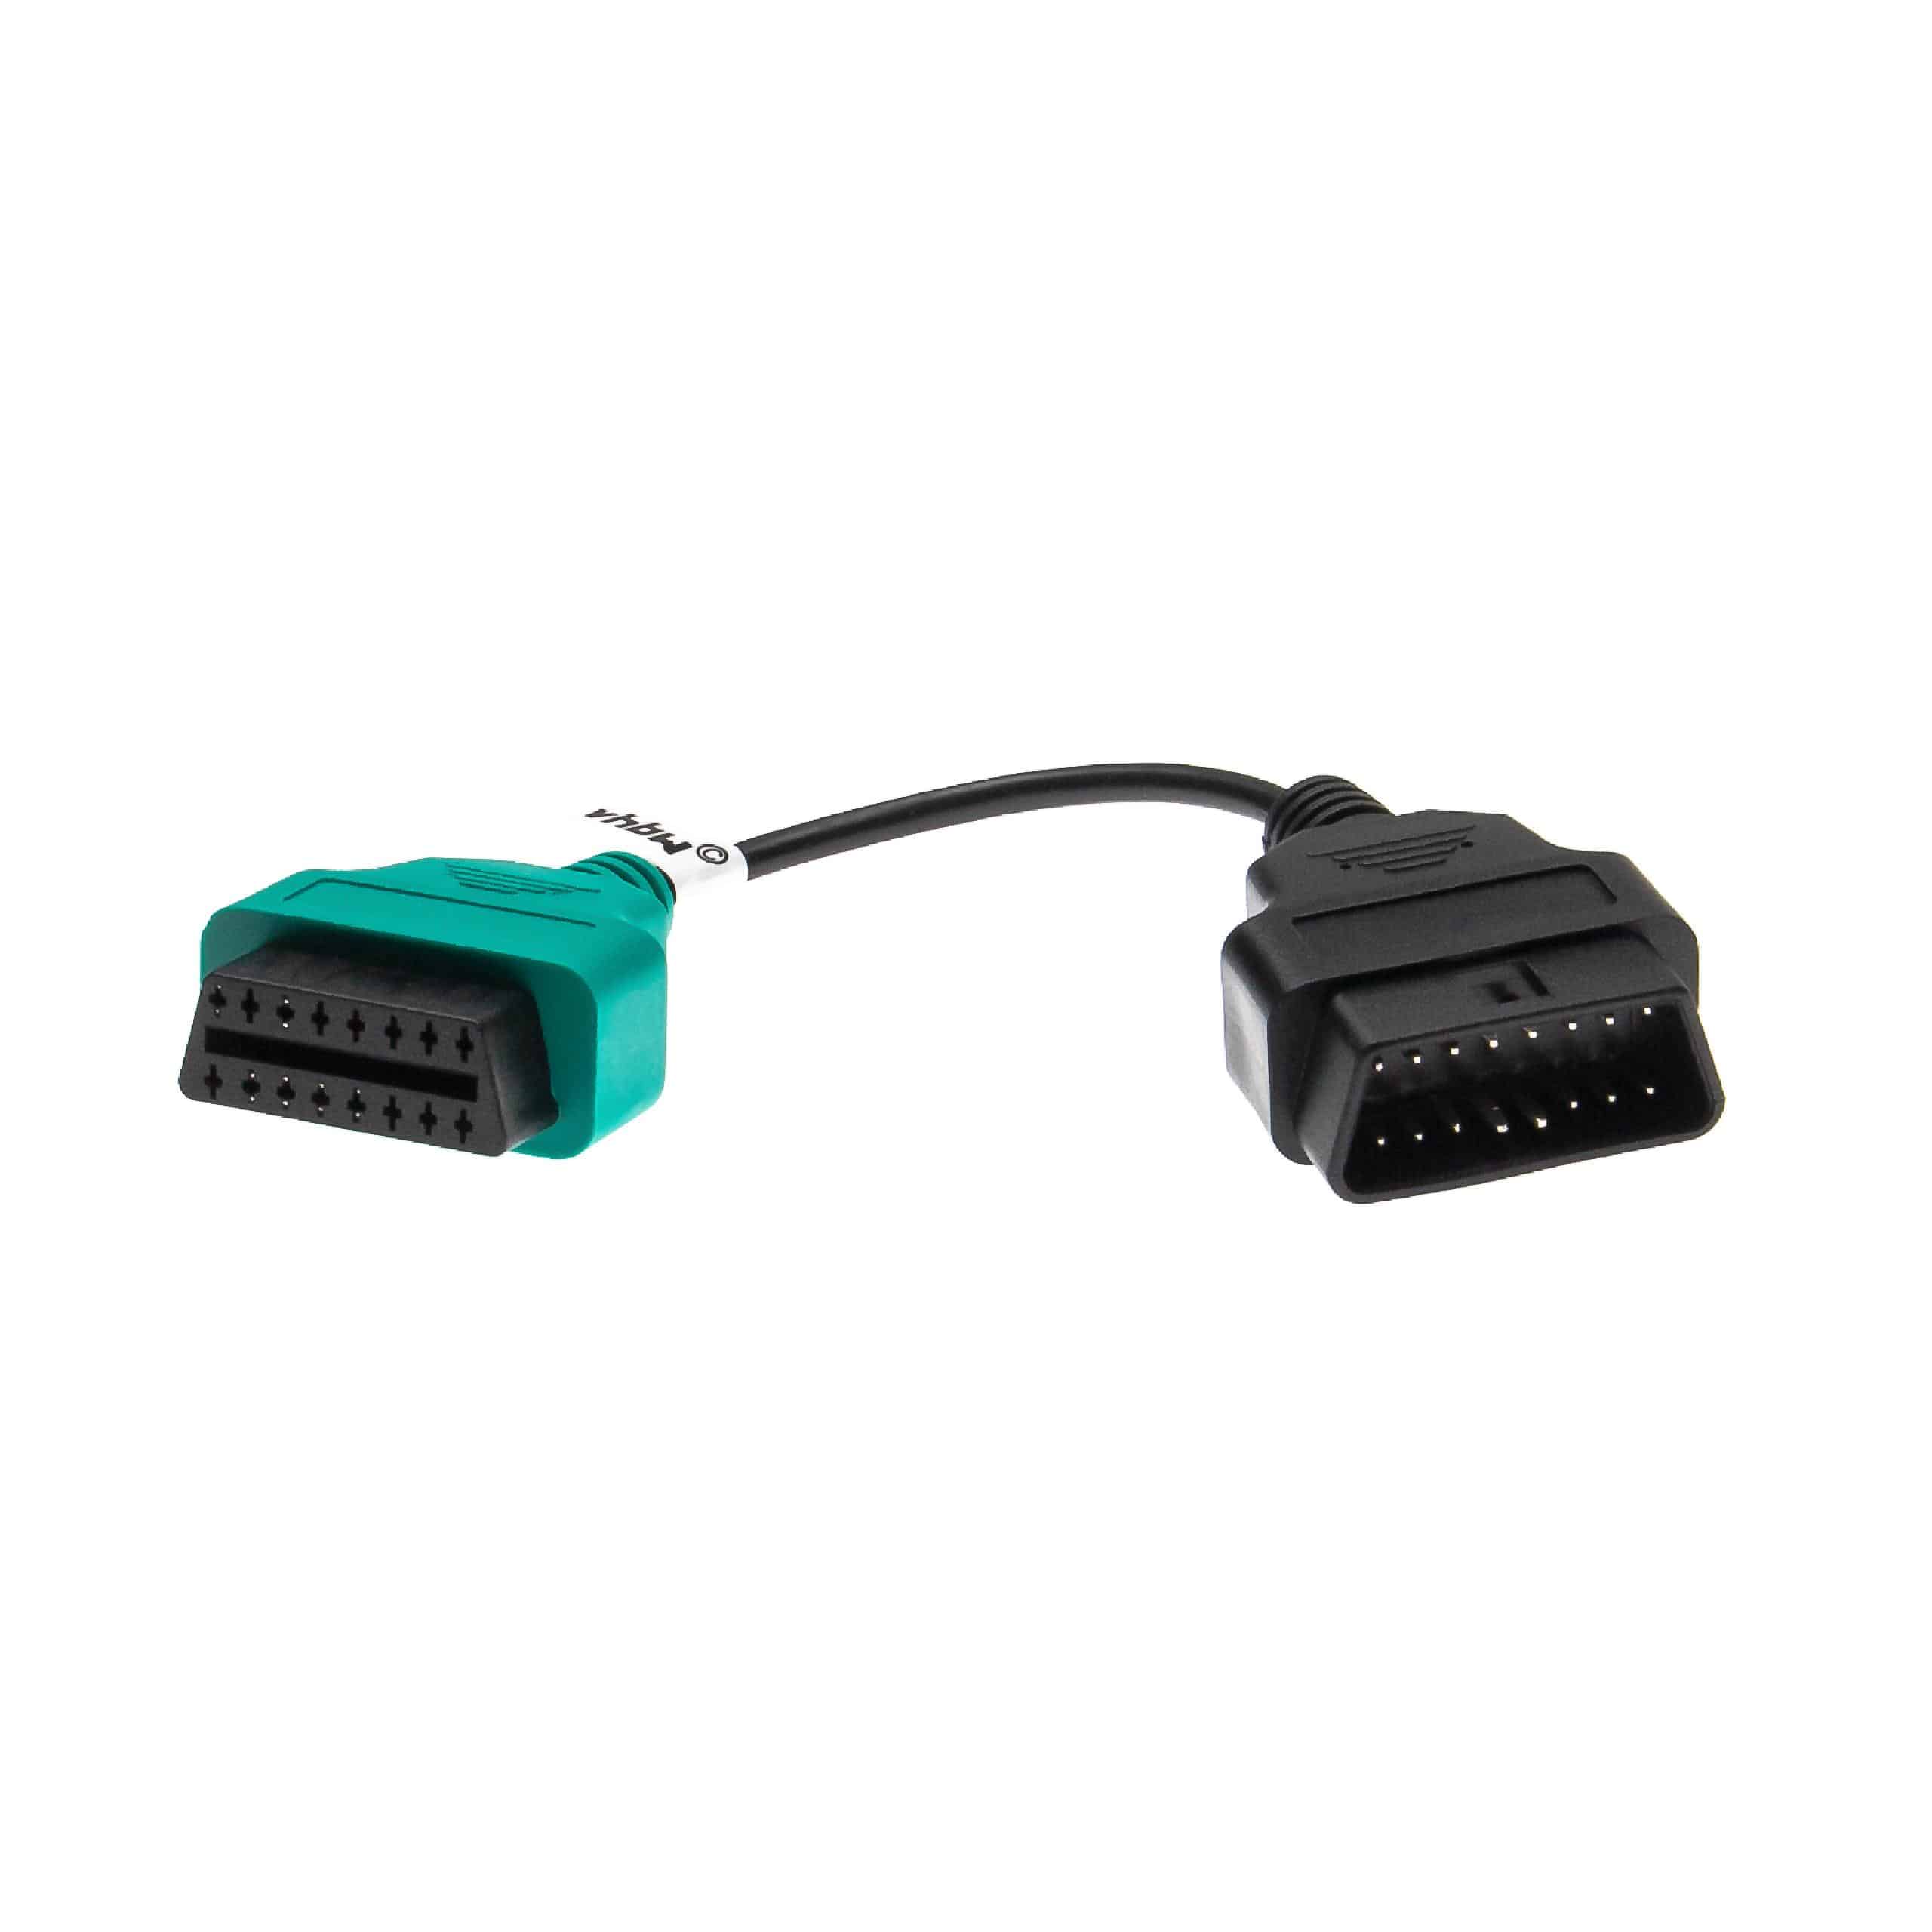 vhbw OBD2 Adapter A1 16Pin OBD1 to OBD2 suitable for GT Alfa Romeo, Fiat, Lancia GT Car, Vehicle - 22 cm